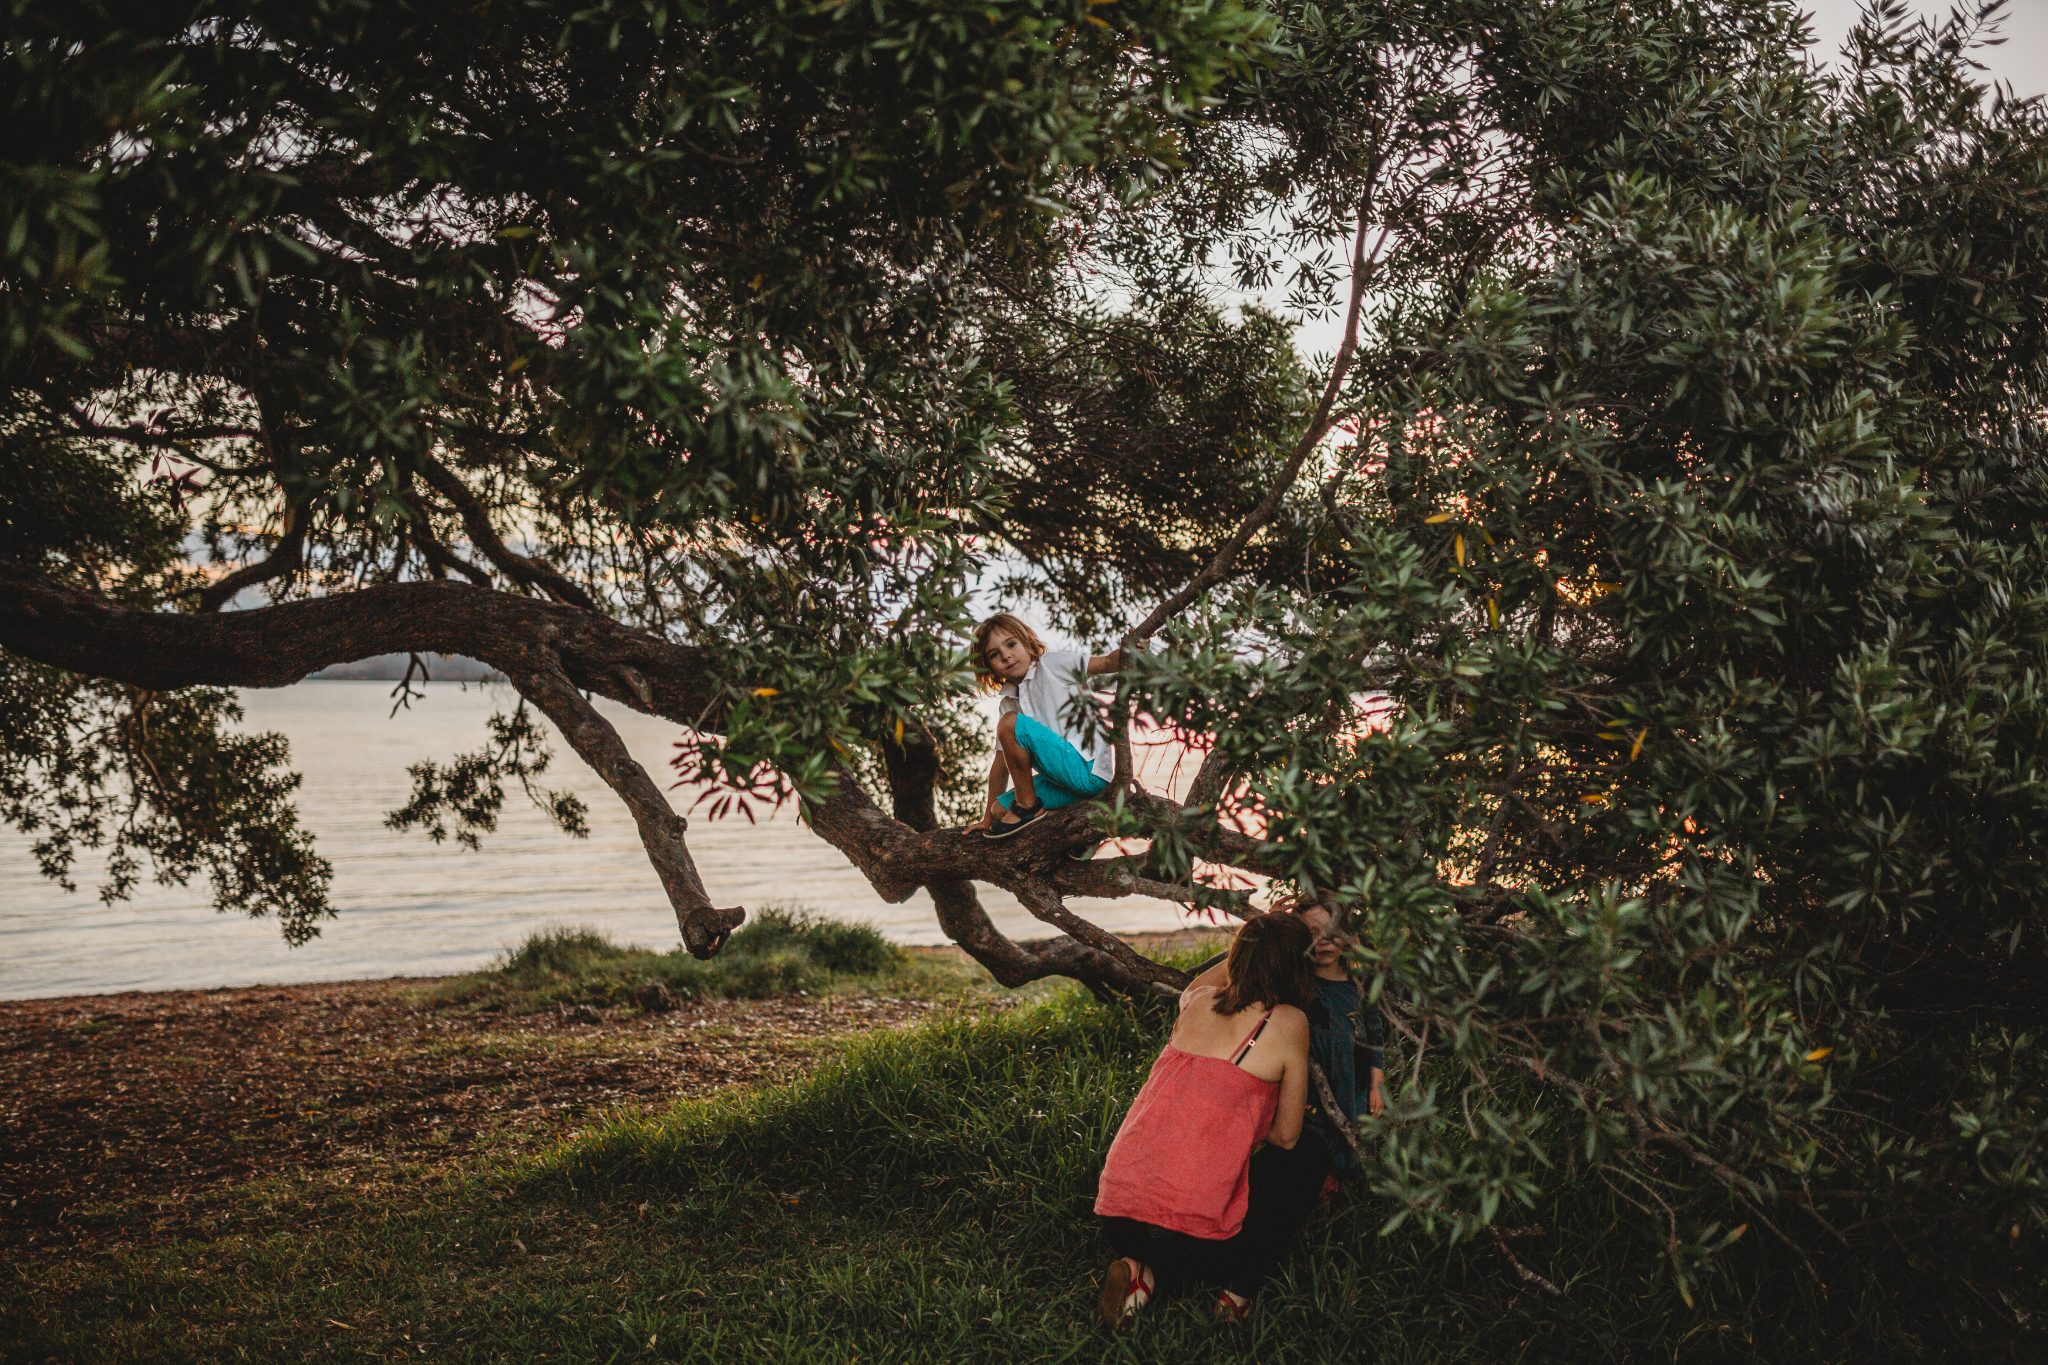 Young boy climbing tree by the lake as his mother watches